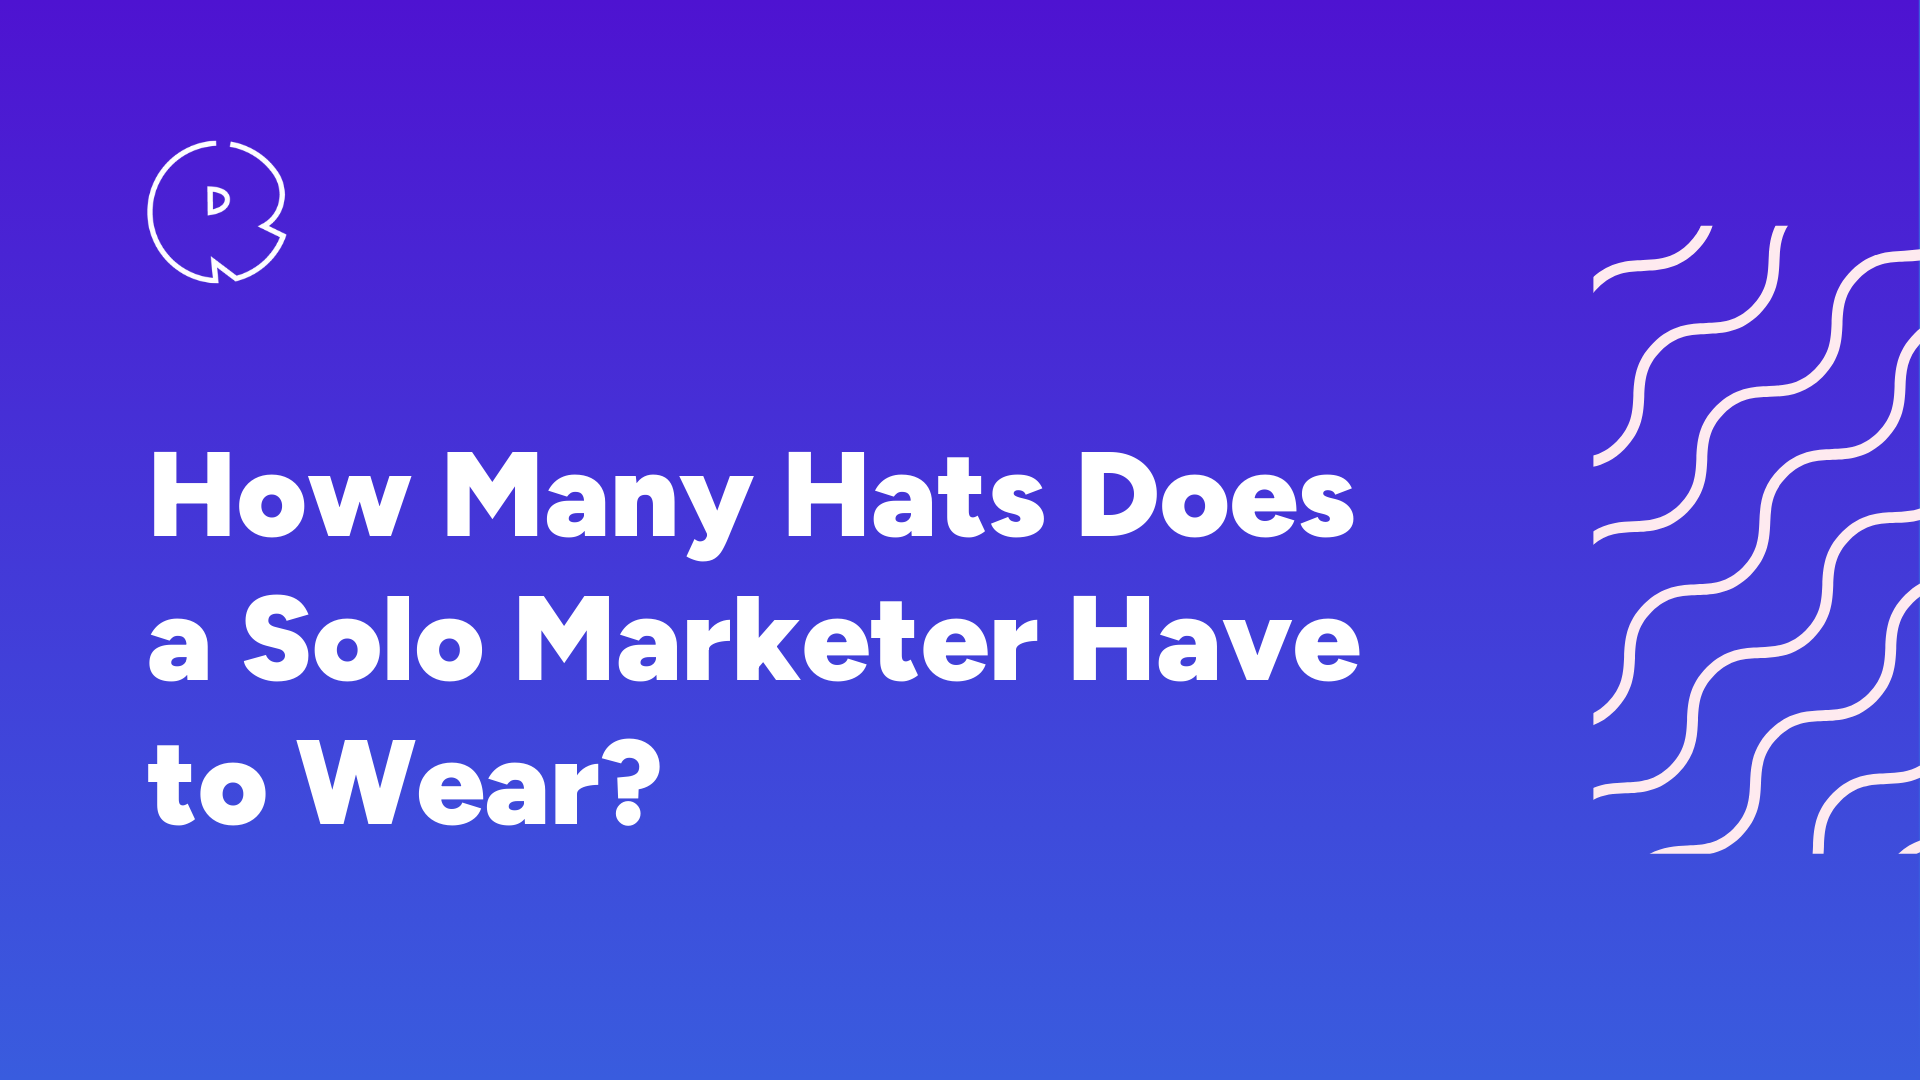 How Many Hats Does a Solo Marketer Have to Wear?